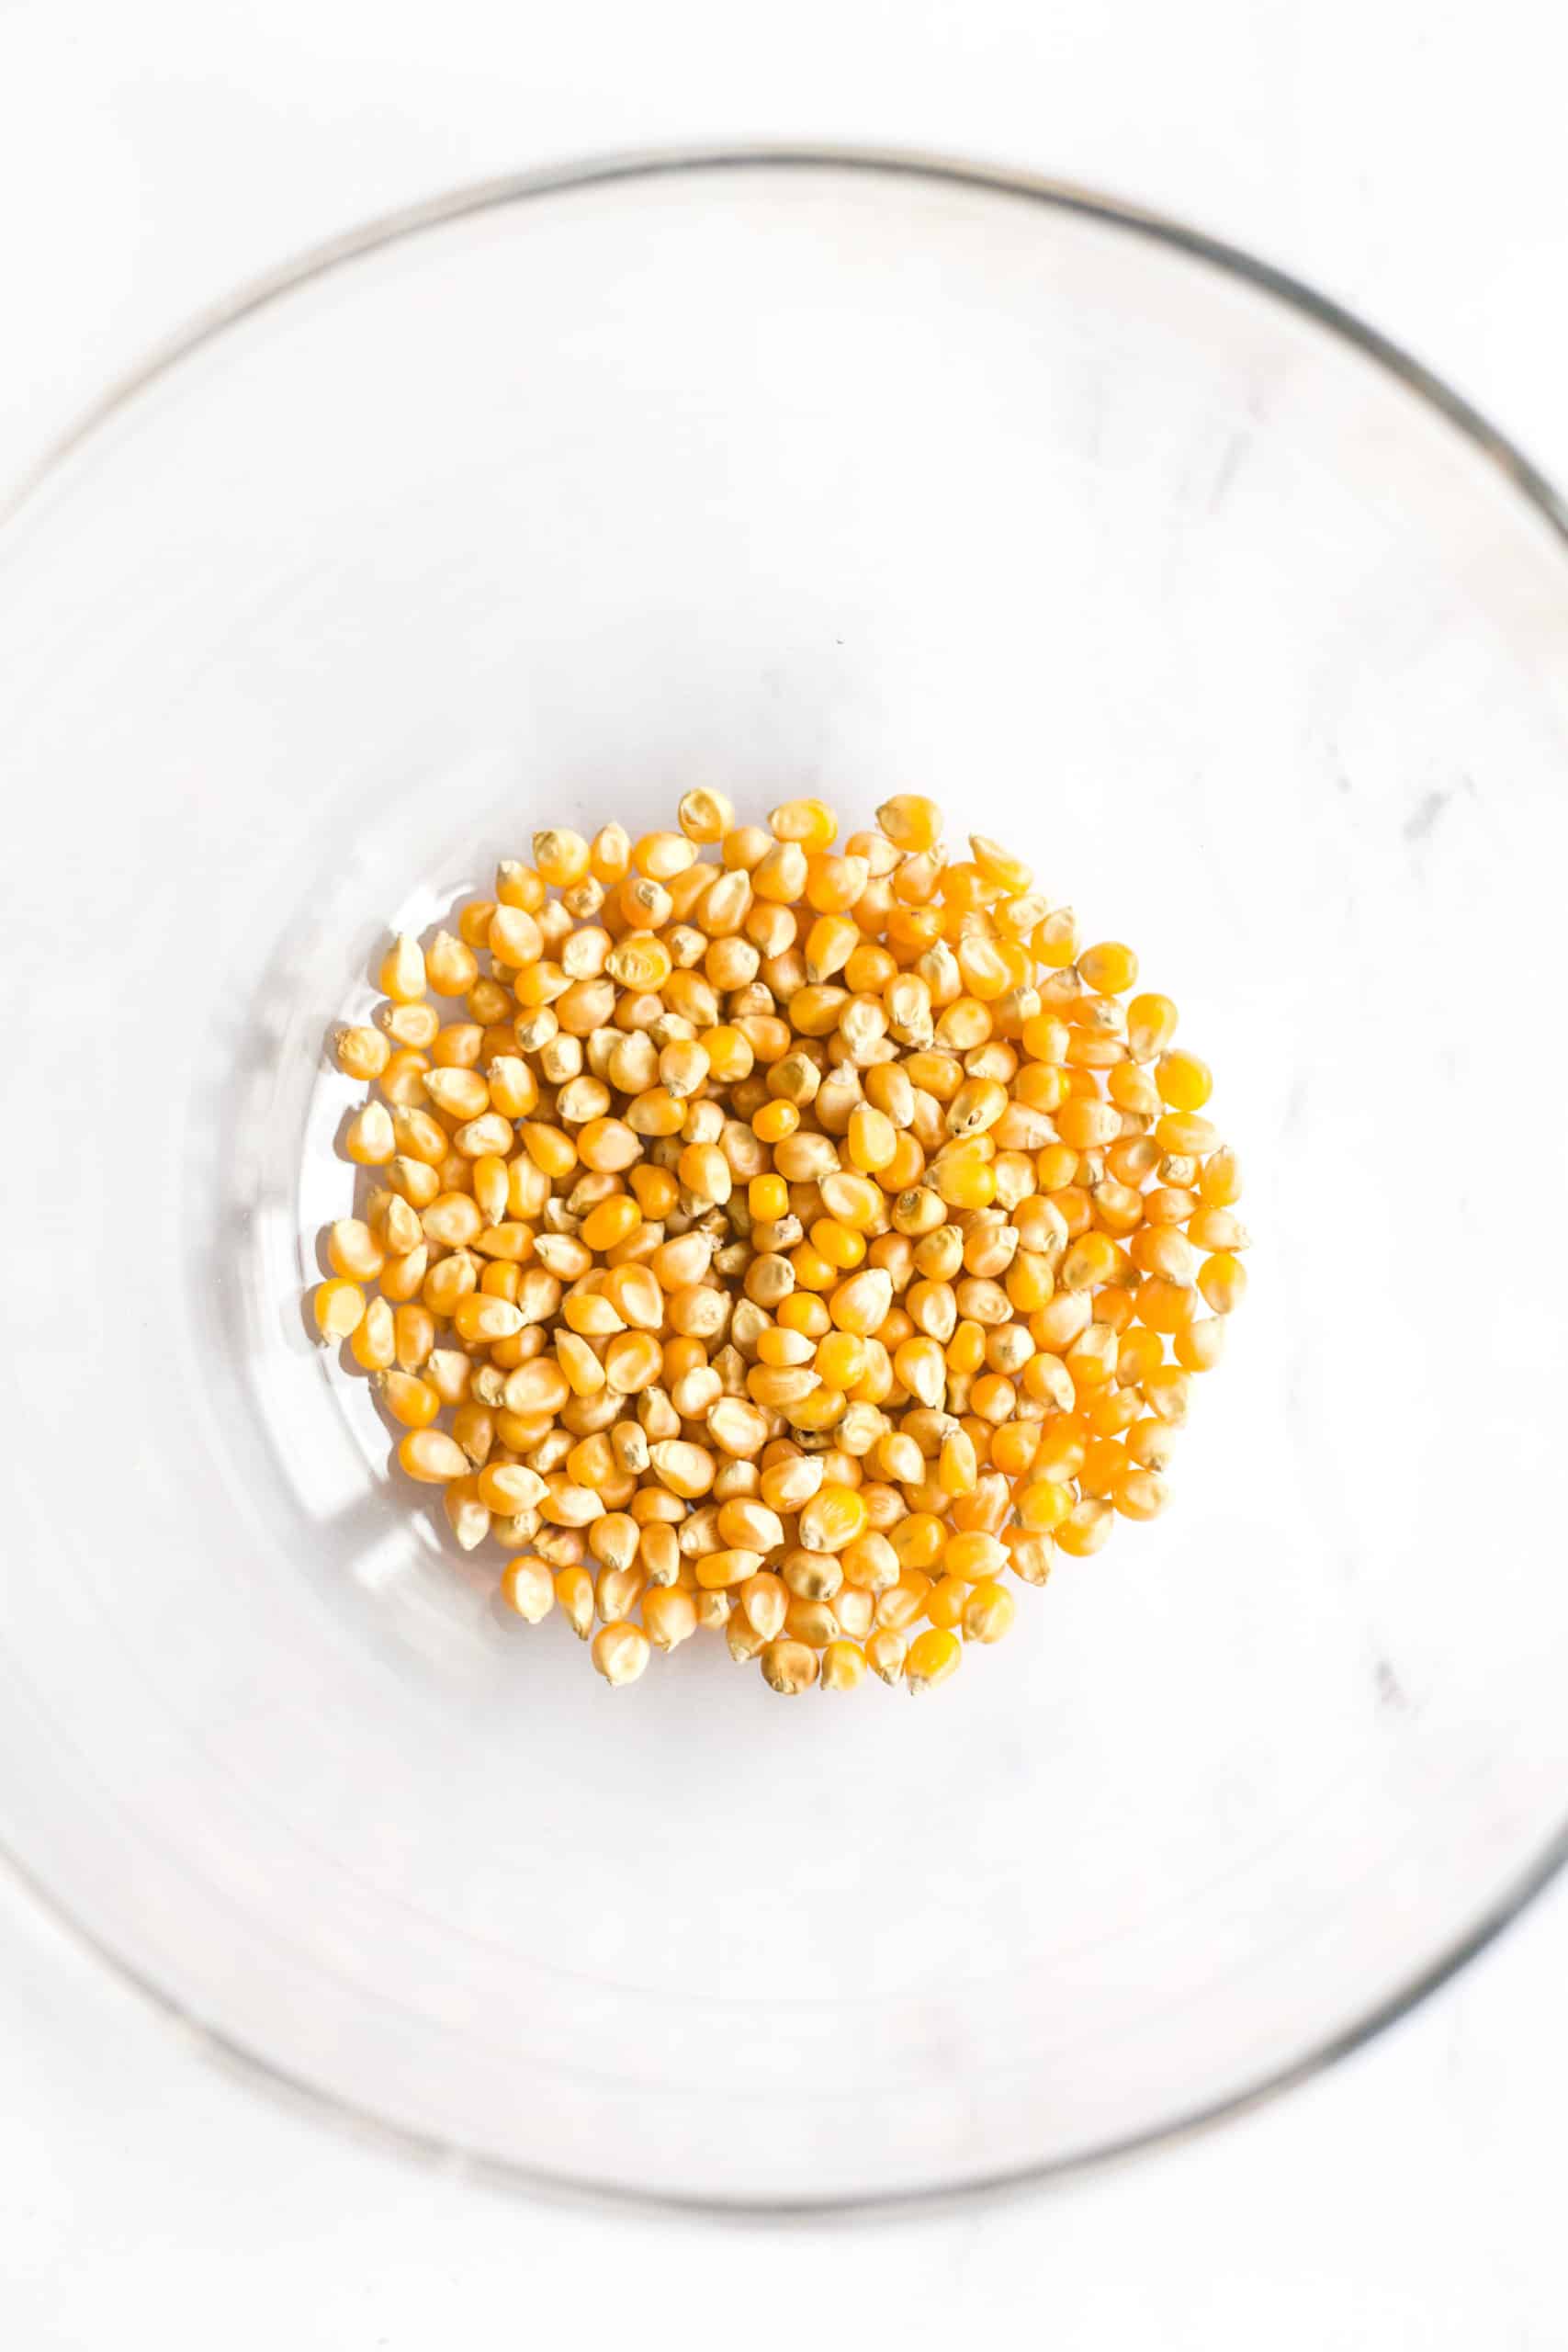 Yellow popcorn kernels in a glass pyrex bowl ready to be popped in the microwave